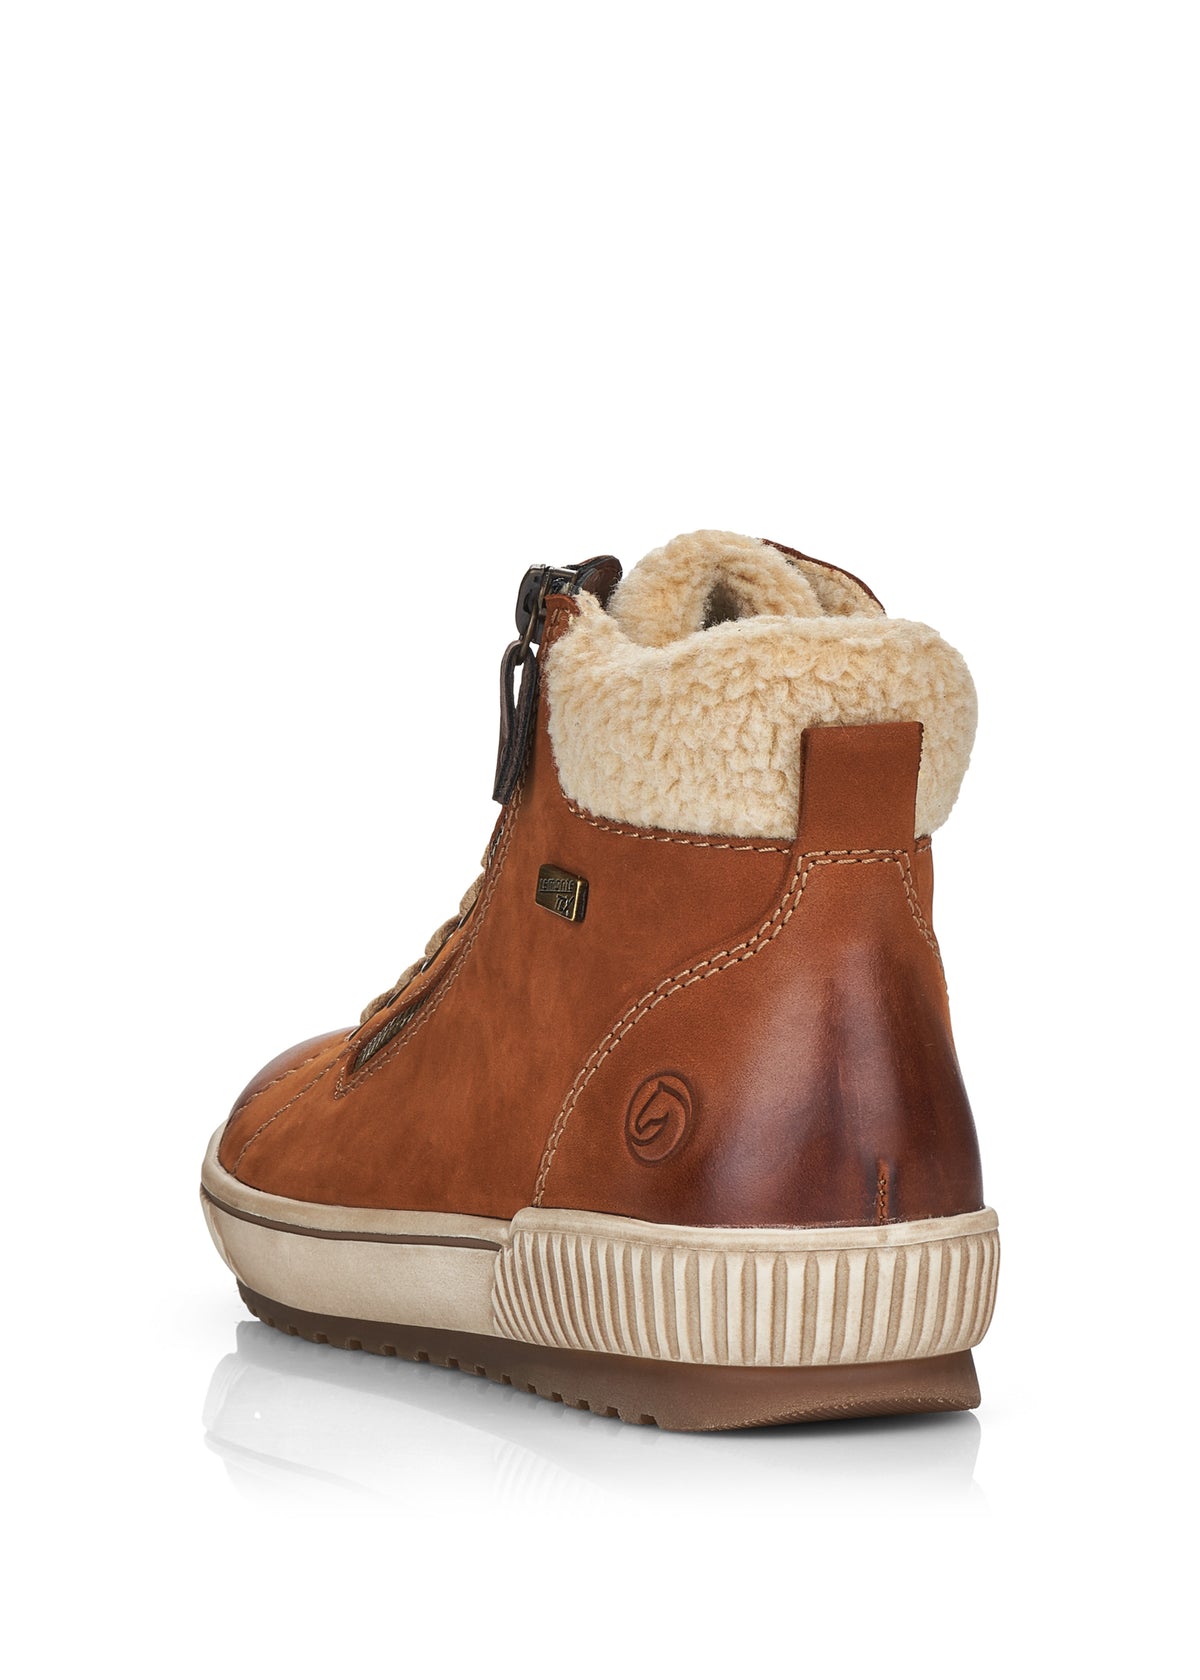 Ankle boots with fur trim - brown, Remonte-TEX